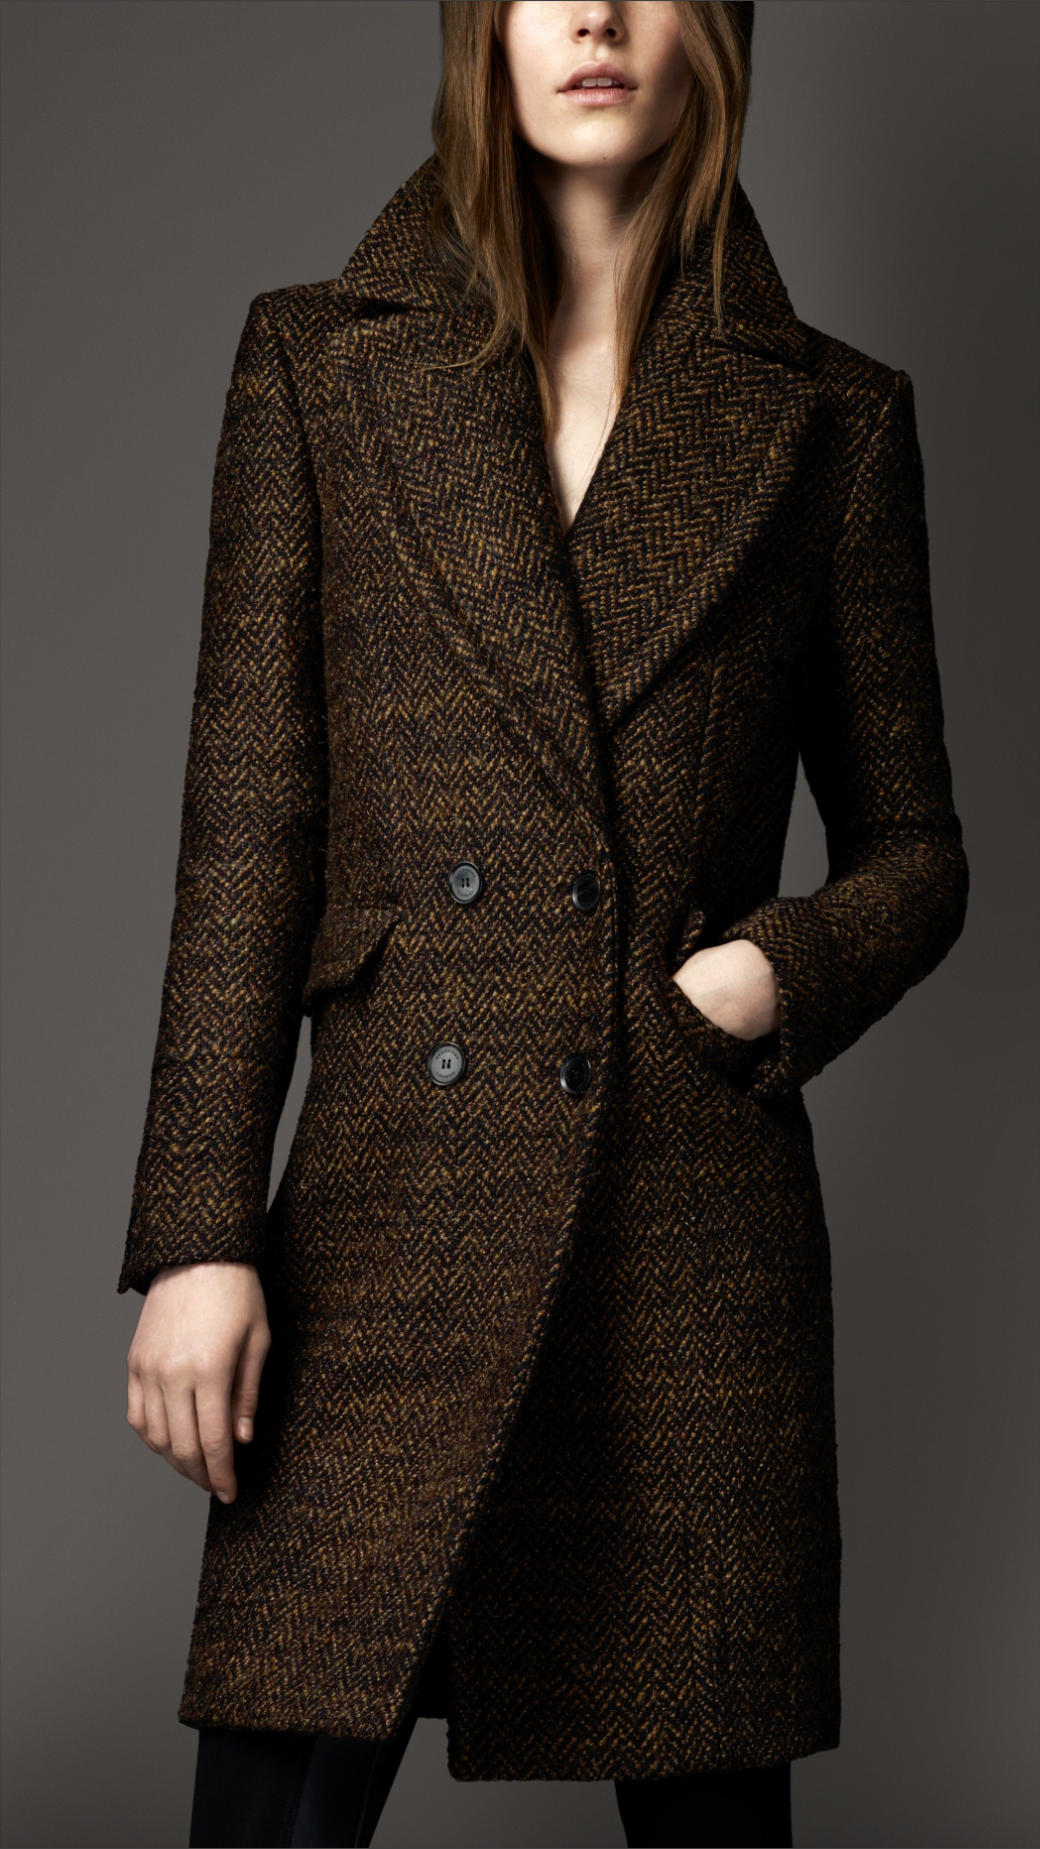 buy > burberry tweed jacket > Up to 73% OFF > Free shipping